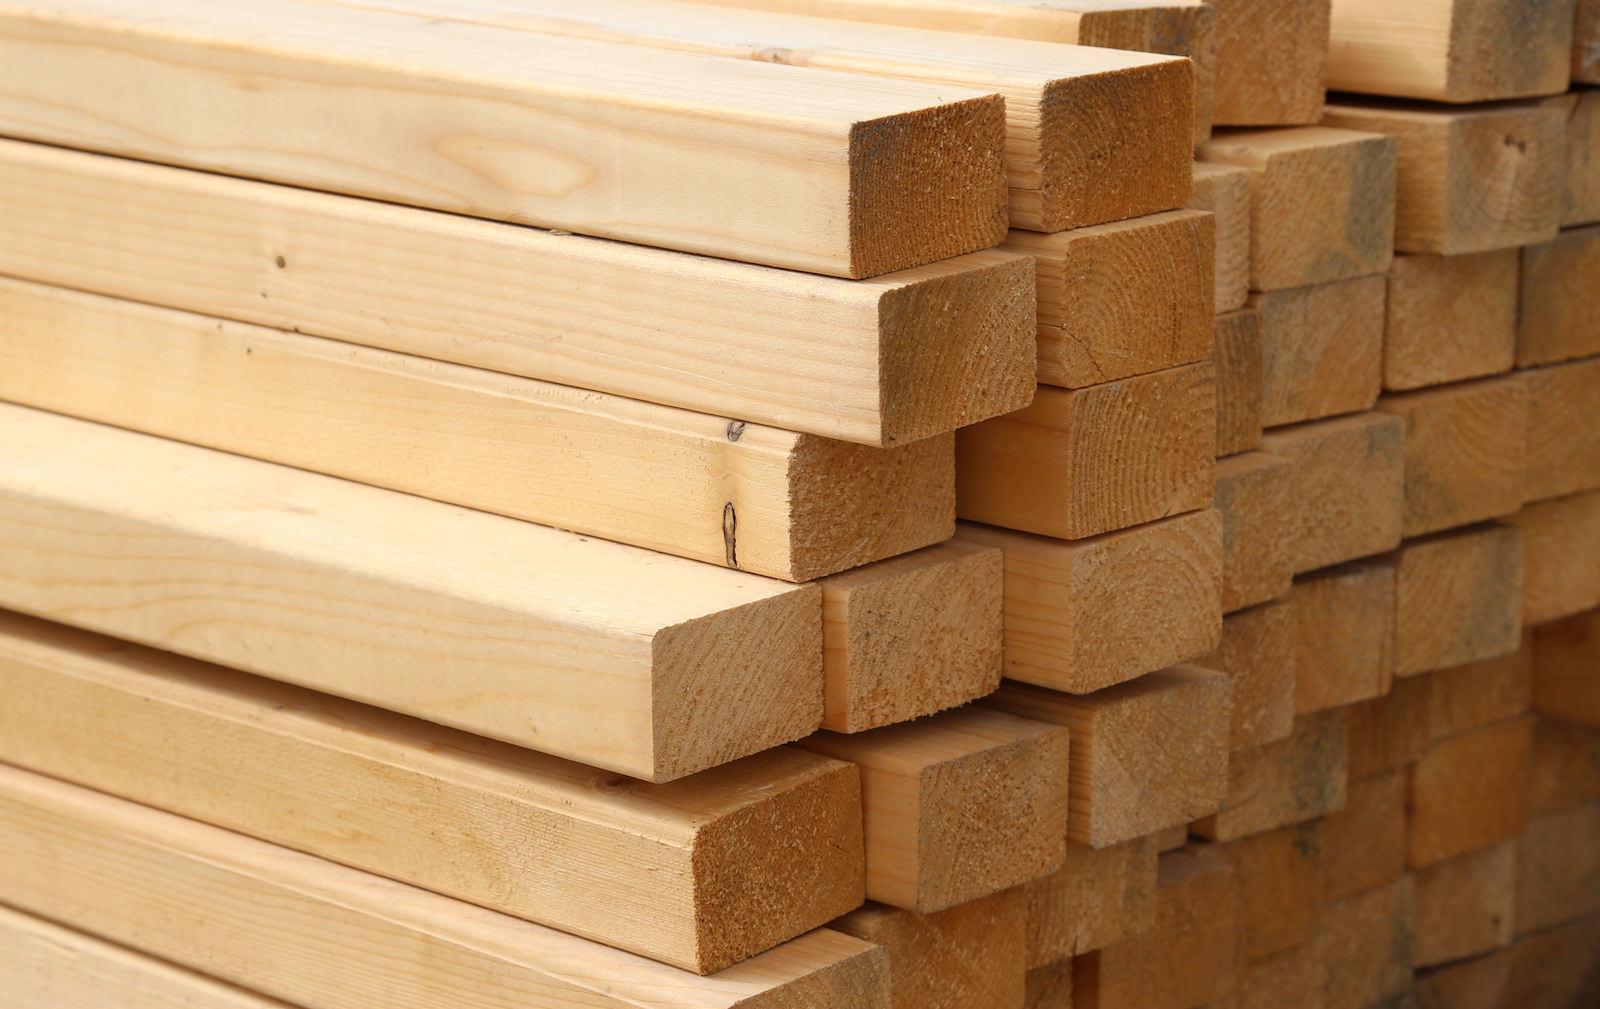 38mm x 63mm x 2.4M CLS Timber (3x2x8ft) - MSS Timber